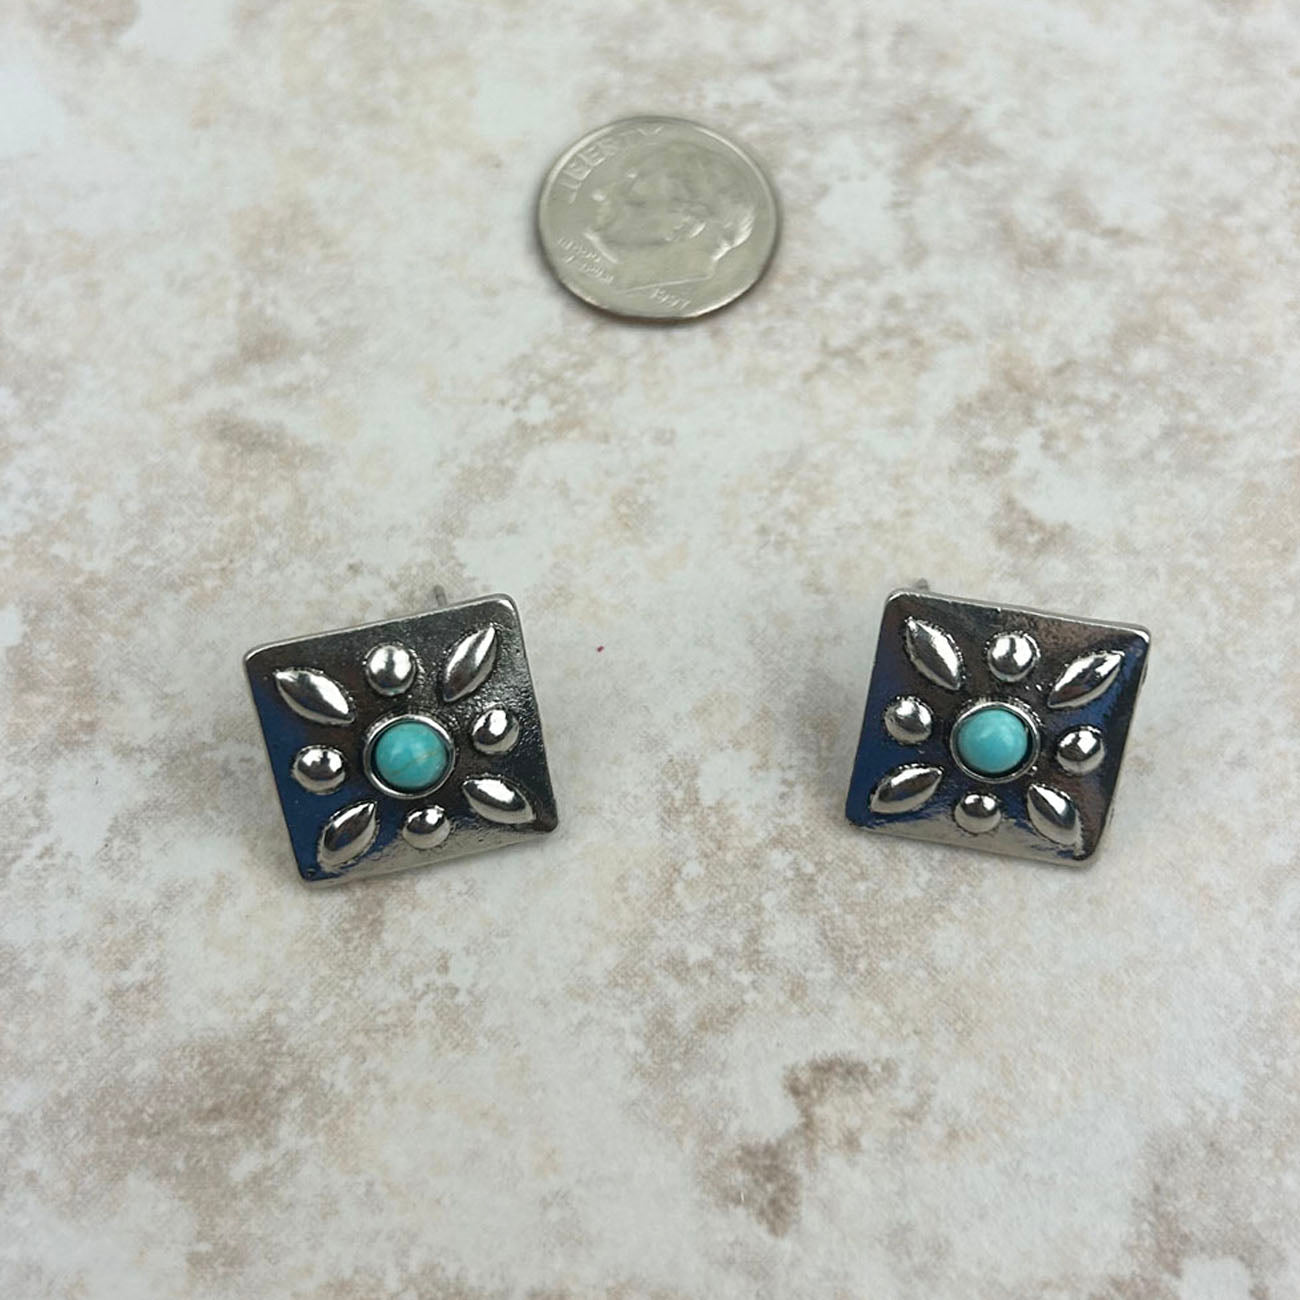 Small silver with blue turquoise stone square concho earring